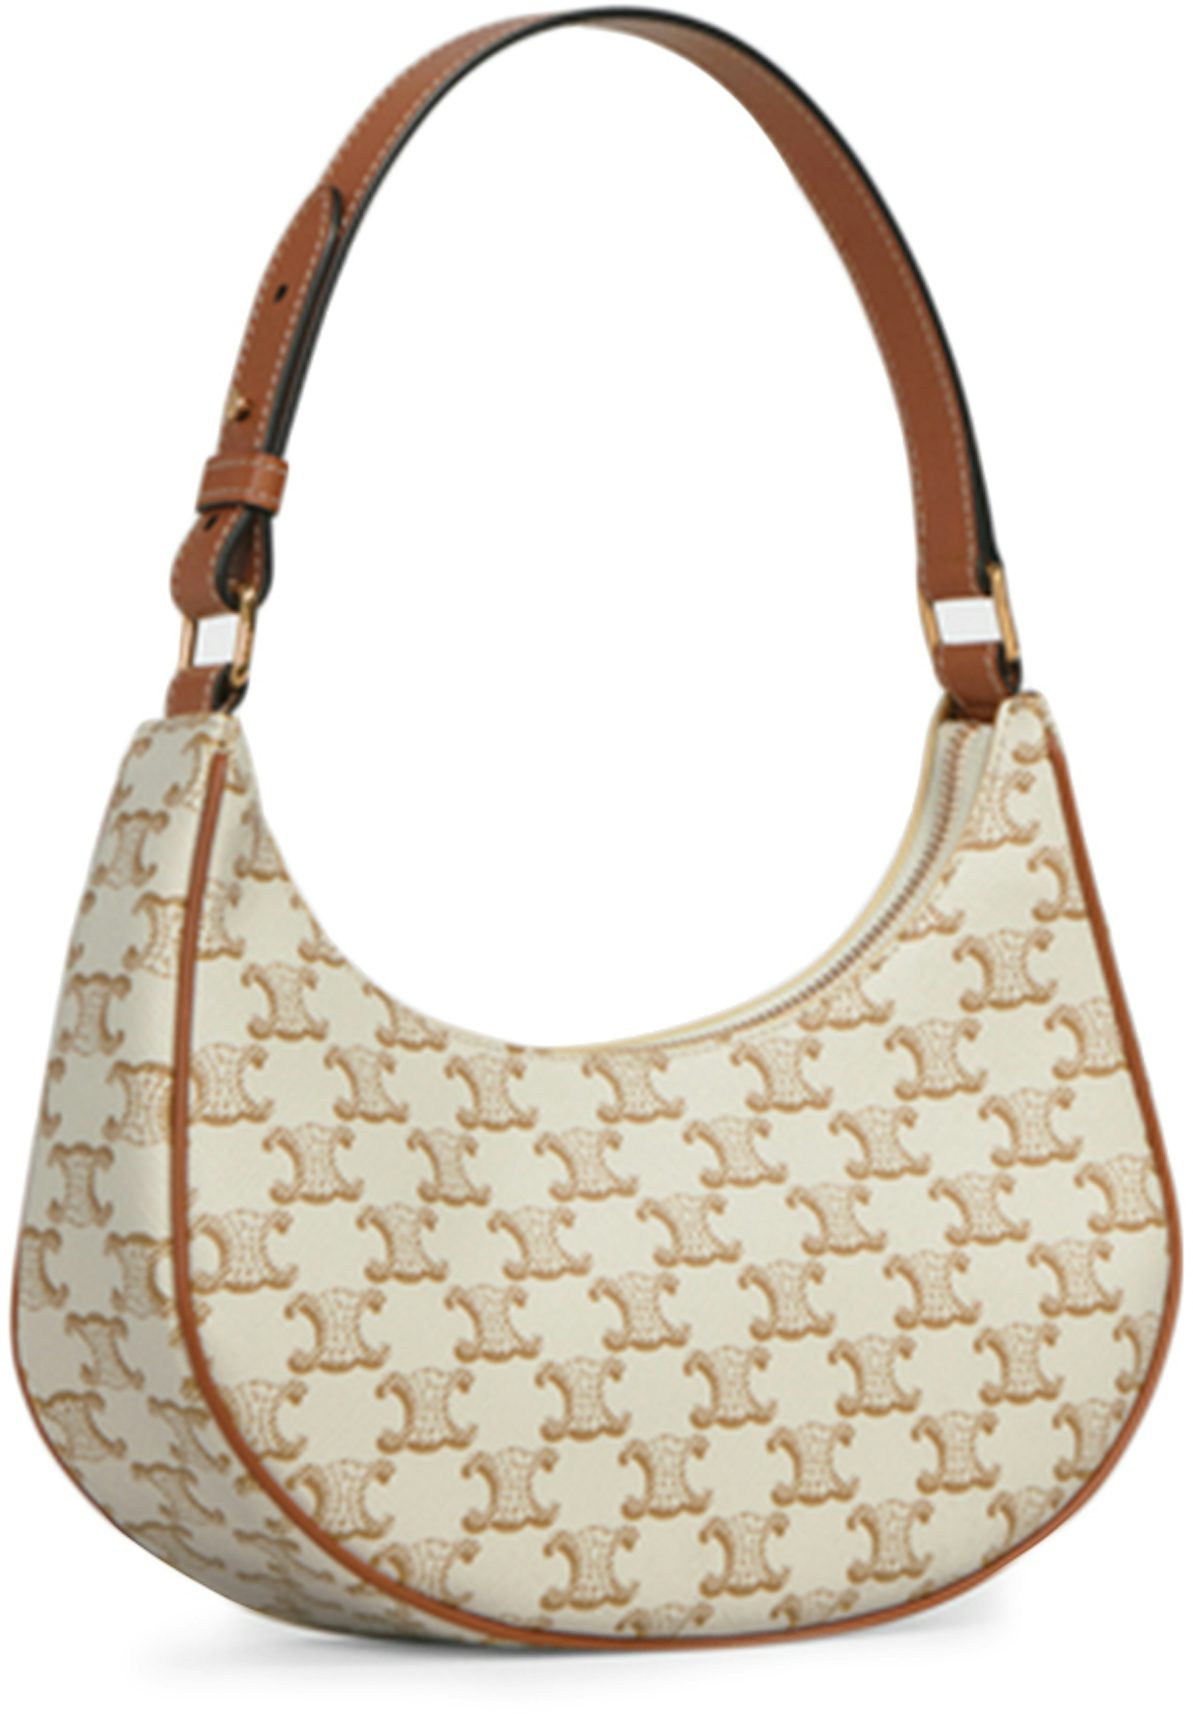 Celine Ava Bag Triomphe White in Coated Canvas/Calfskin with Gold